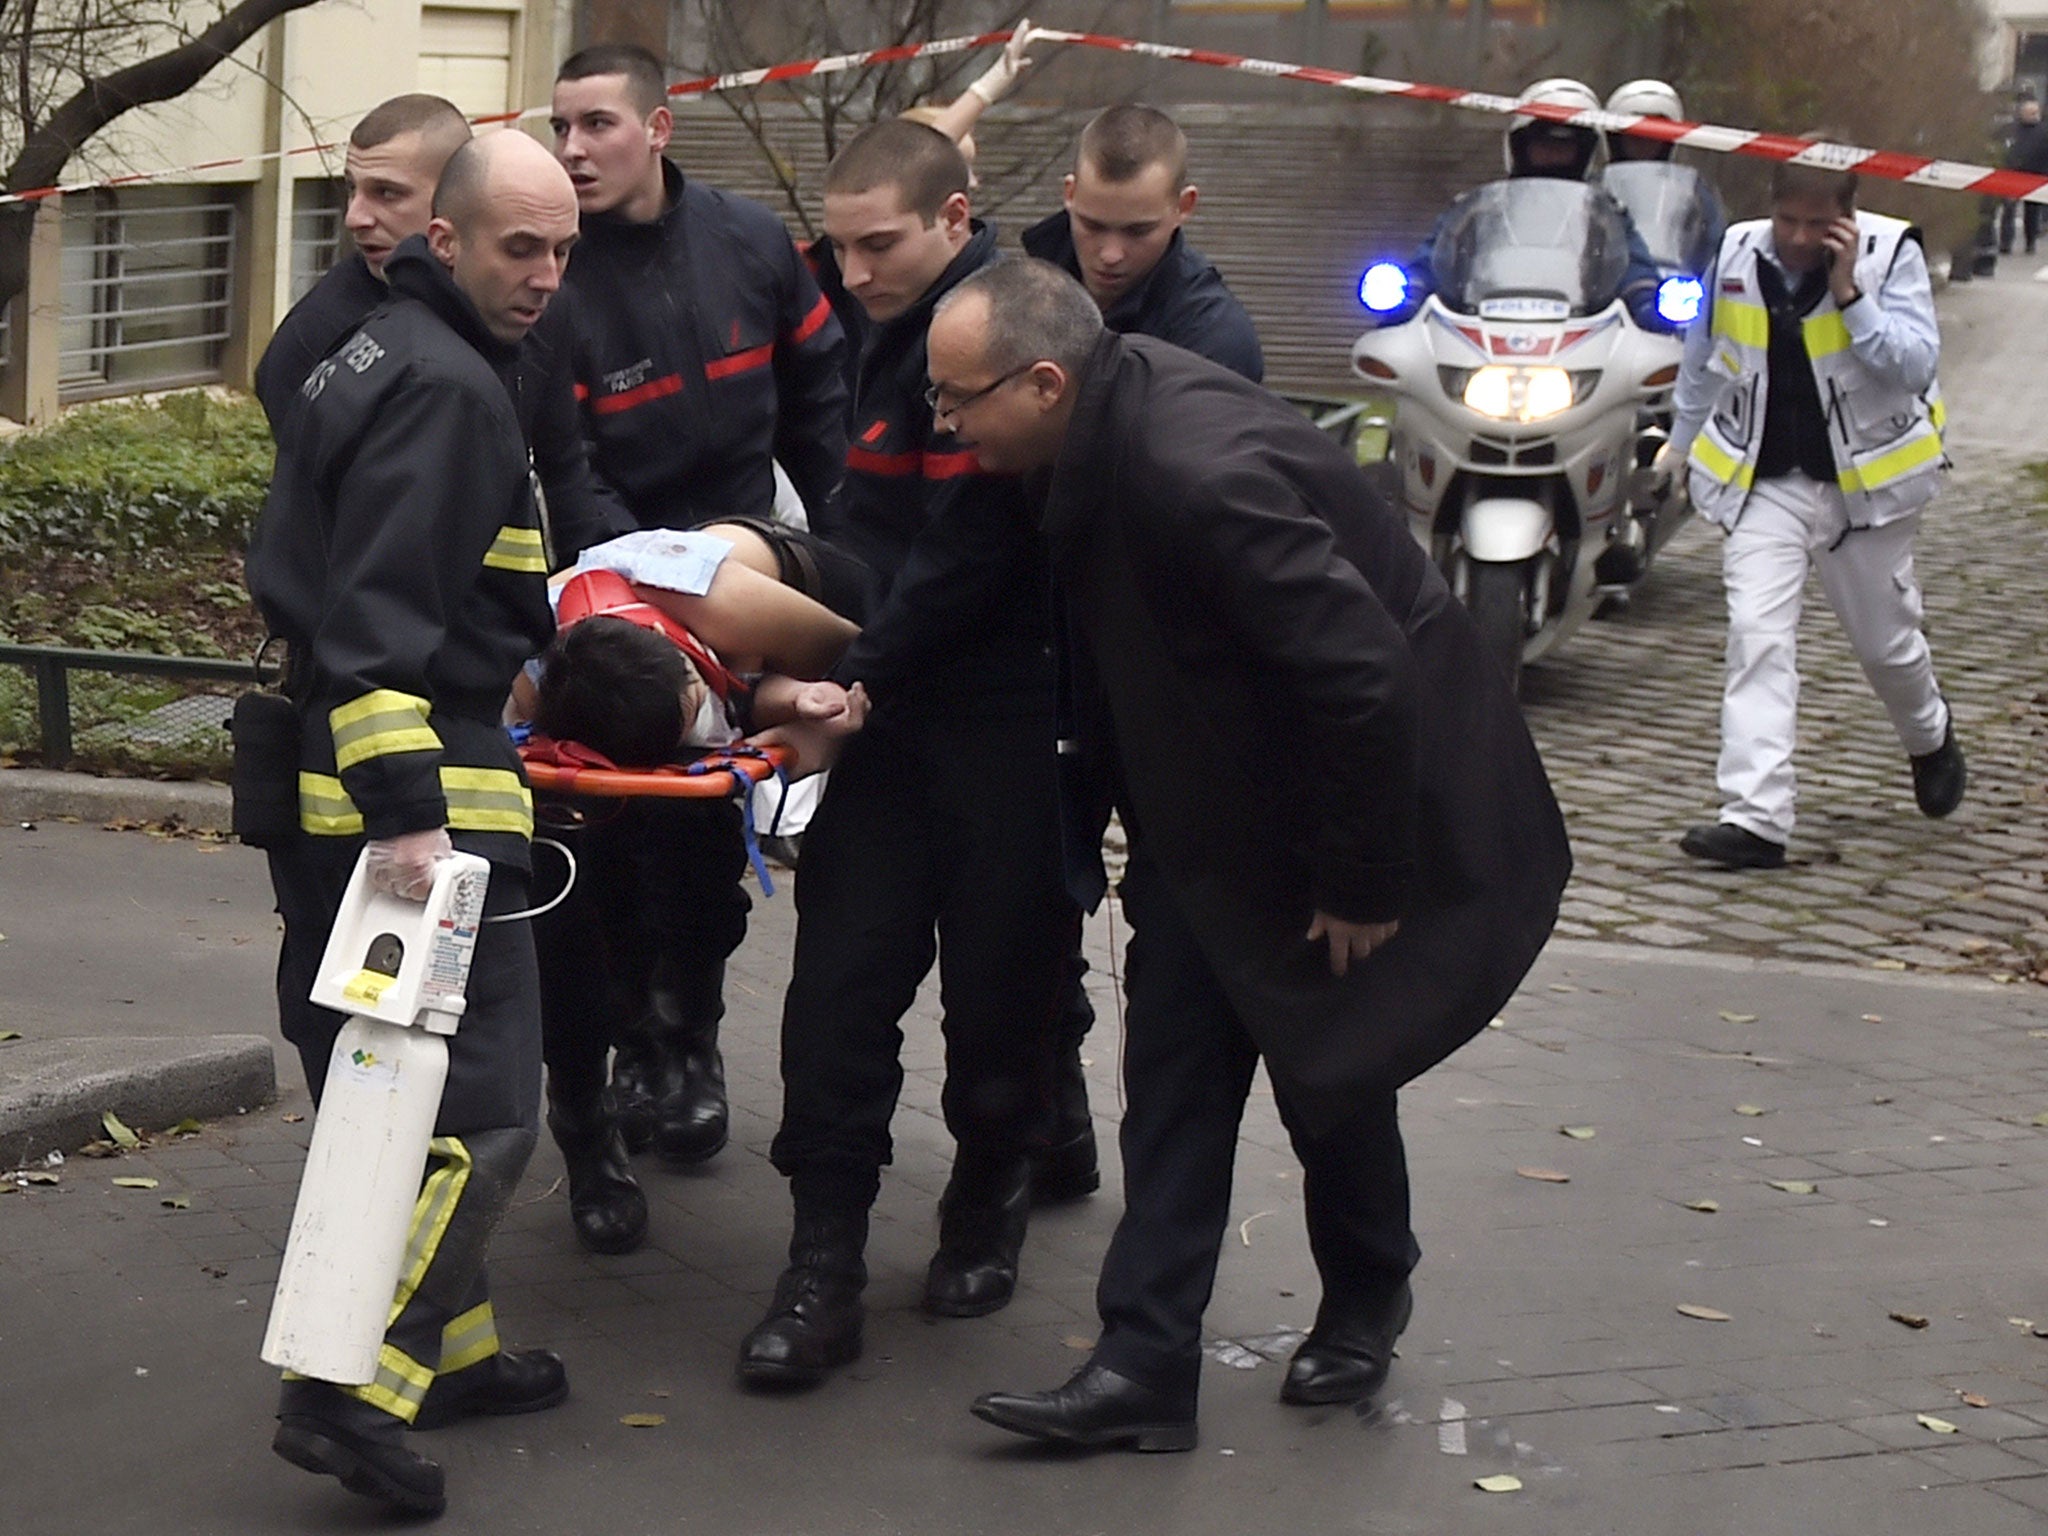 A victim is evacuated on a stretcher after armed gunmen stormed the offices of the French satirical newspaper Charlie Hebdo in Paris